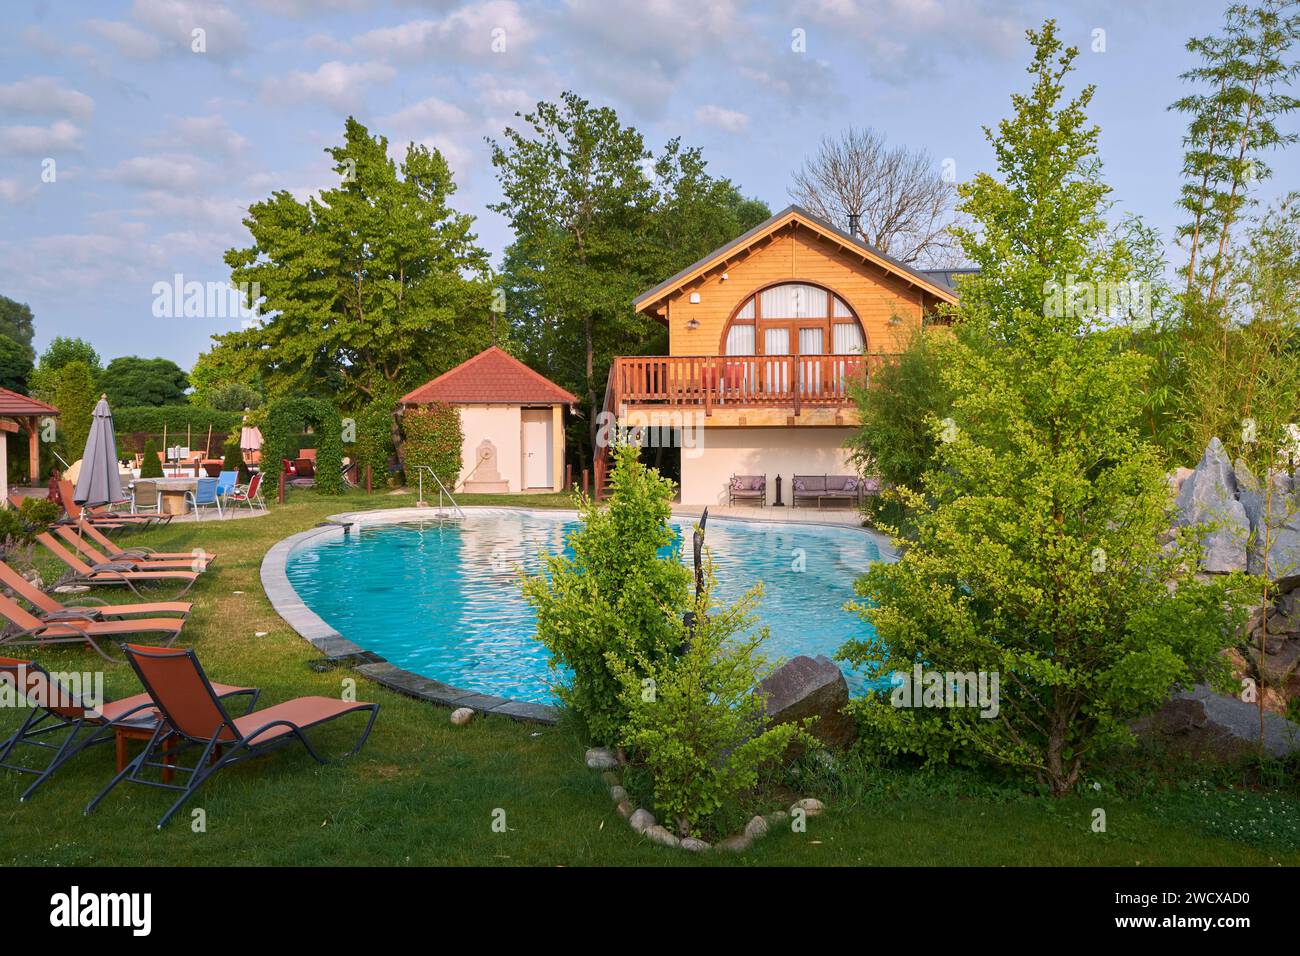 France, Moselle, Conde Northen, Domaine La Grange de Conde, Hotel and Inn Restaurant, the swimming pool and the chalet Reve de Lune Stock Photo